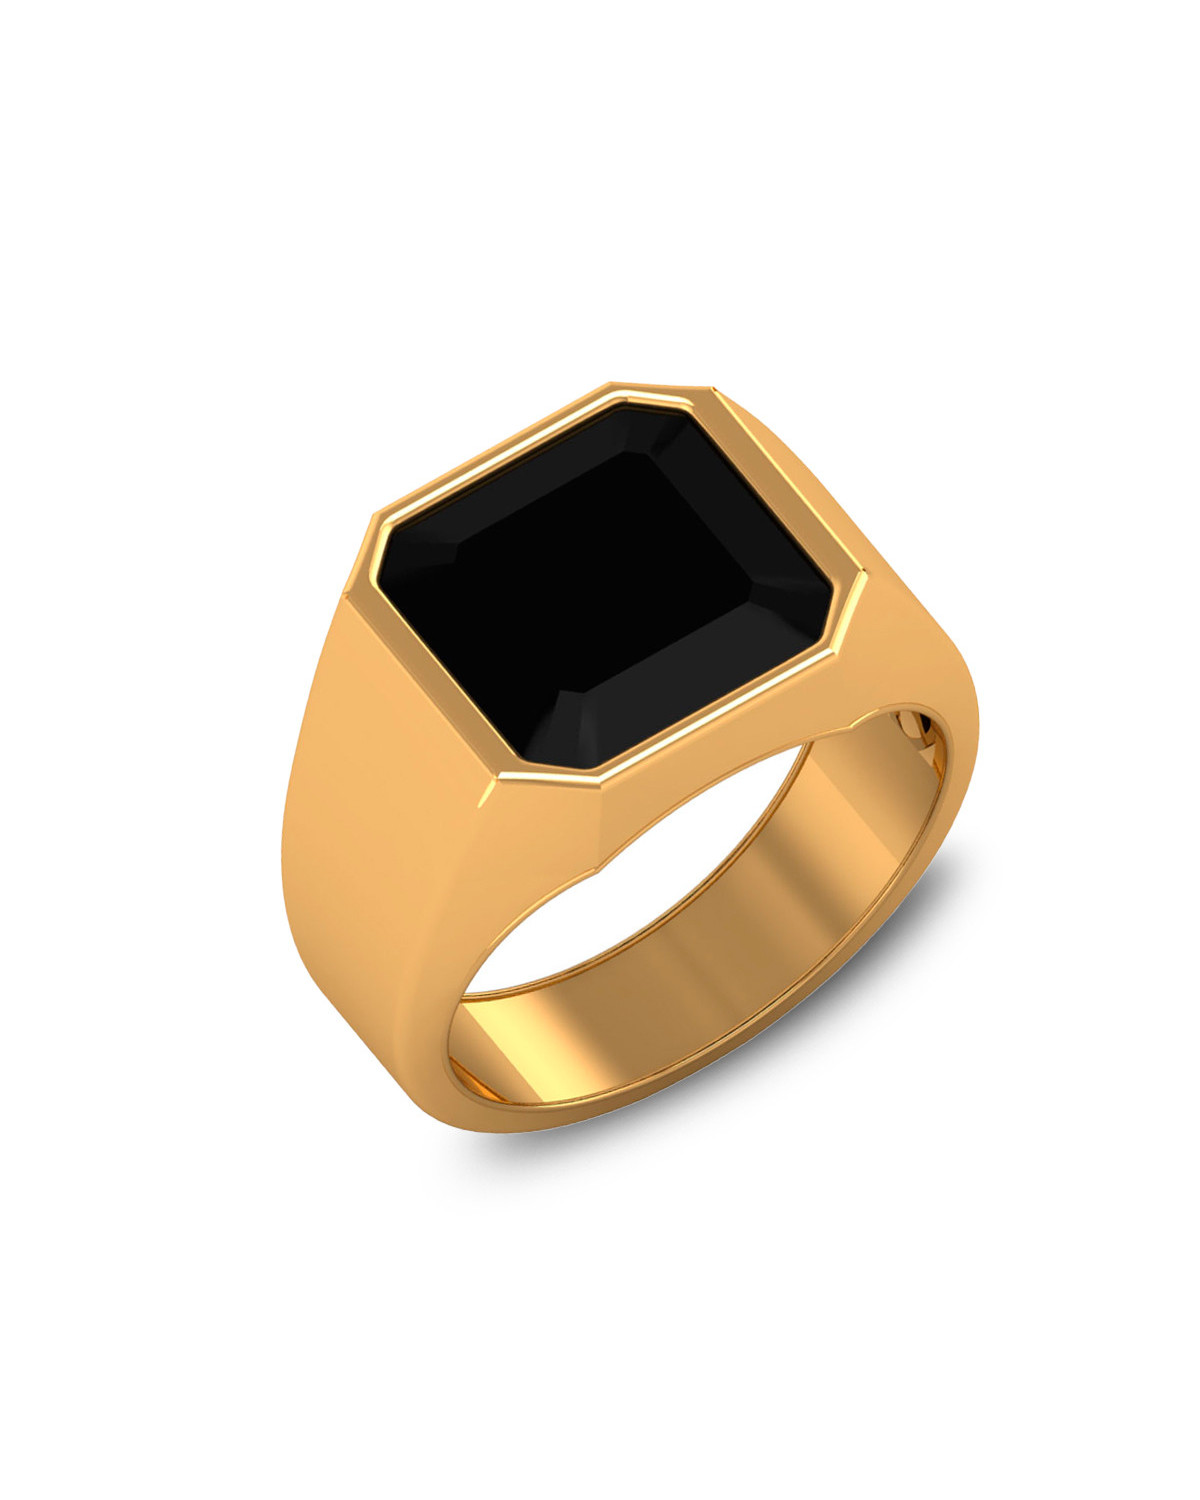 Bague Or Jaune Onyx Homme 9.25grs